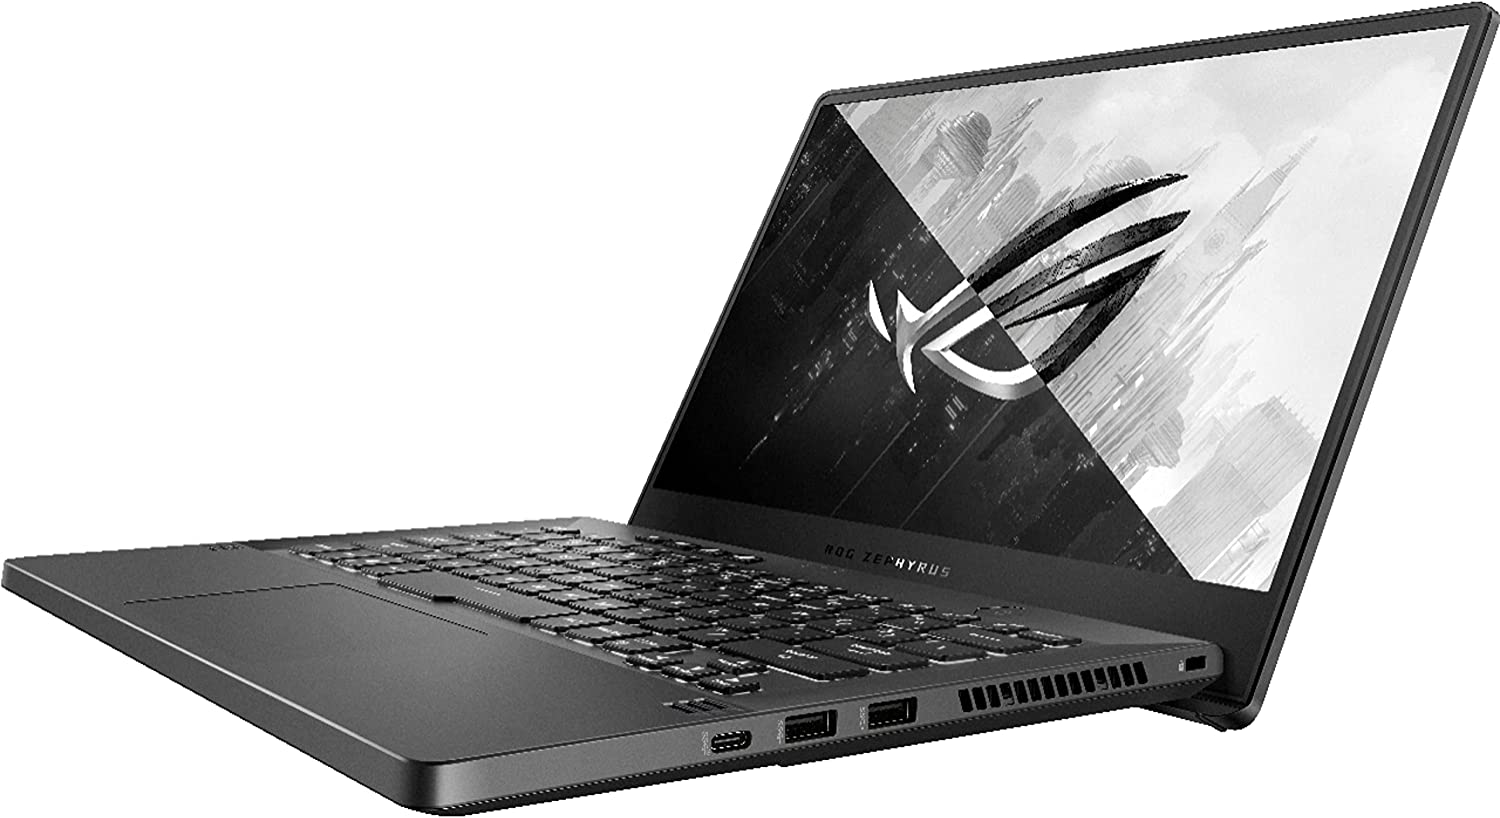 Asus ROG Zephyrus G14 - Guide to Finding the Best Laptop